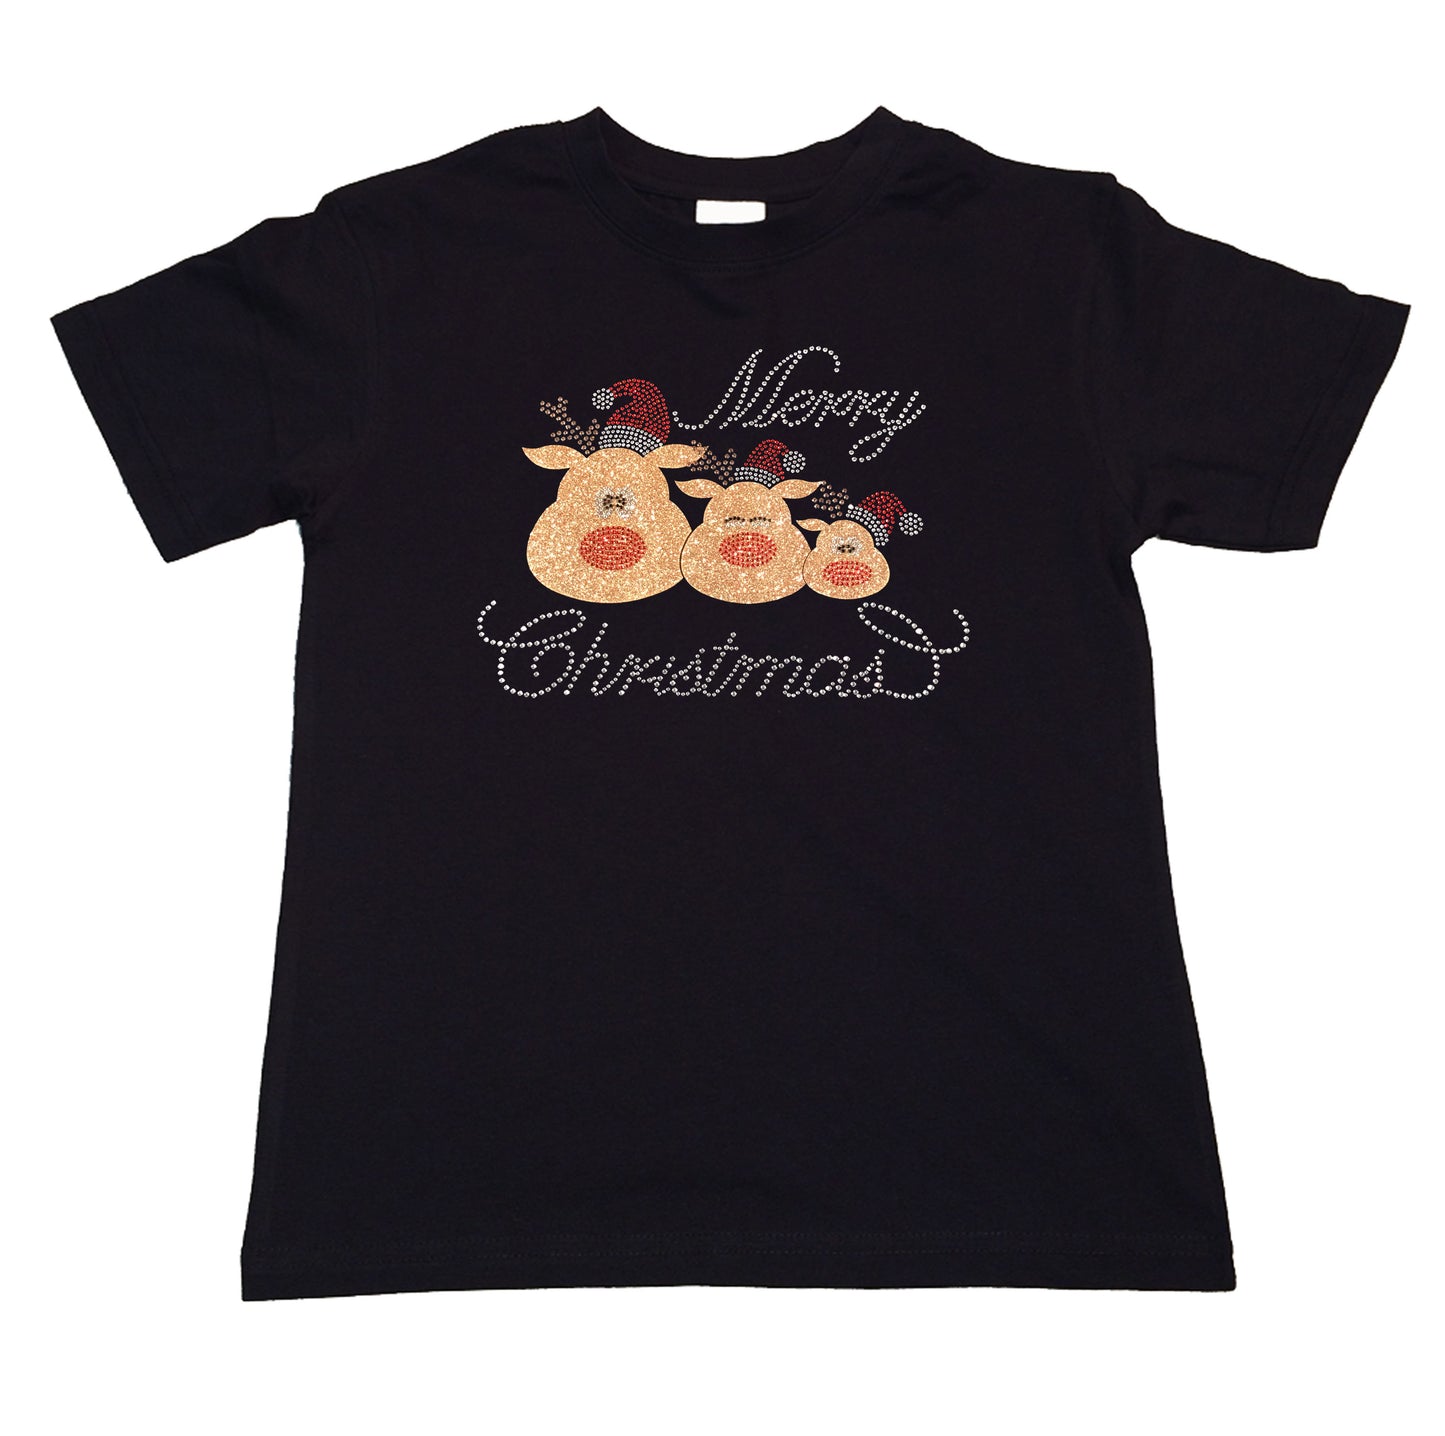 Girls Glitter and Rhinestone T-Shirt " Merry Christmas 3 Reindeer " Kids Size 3 to 14 Available